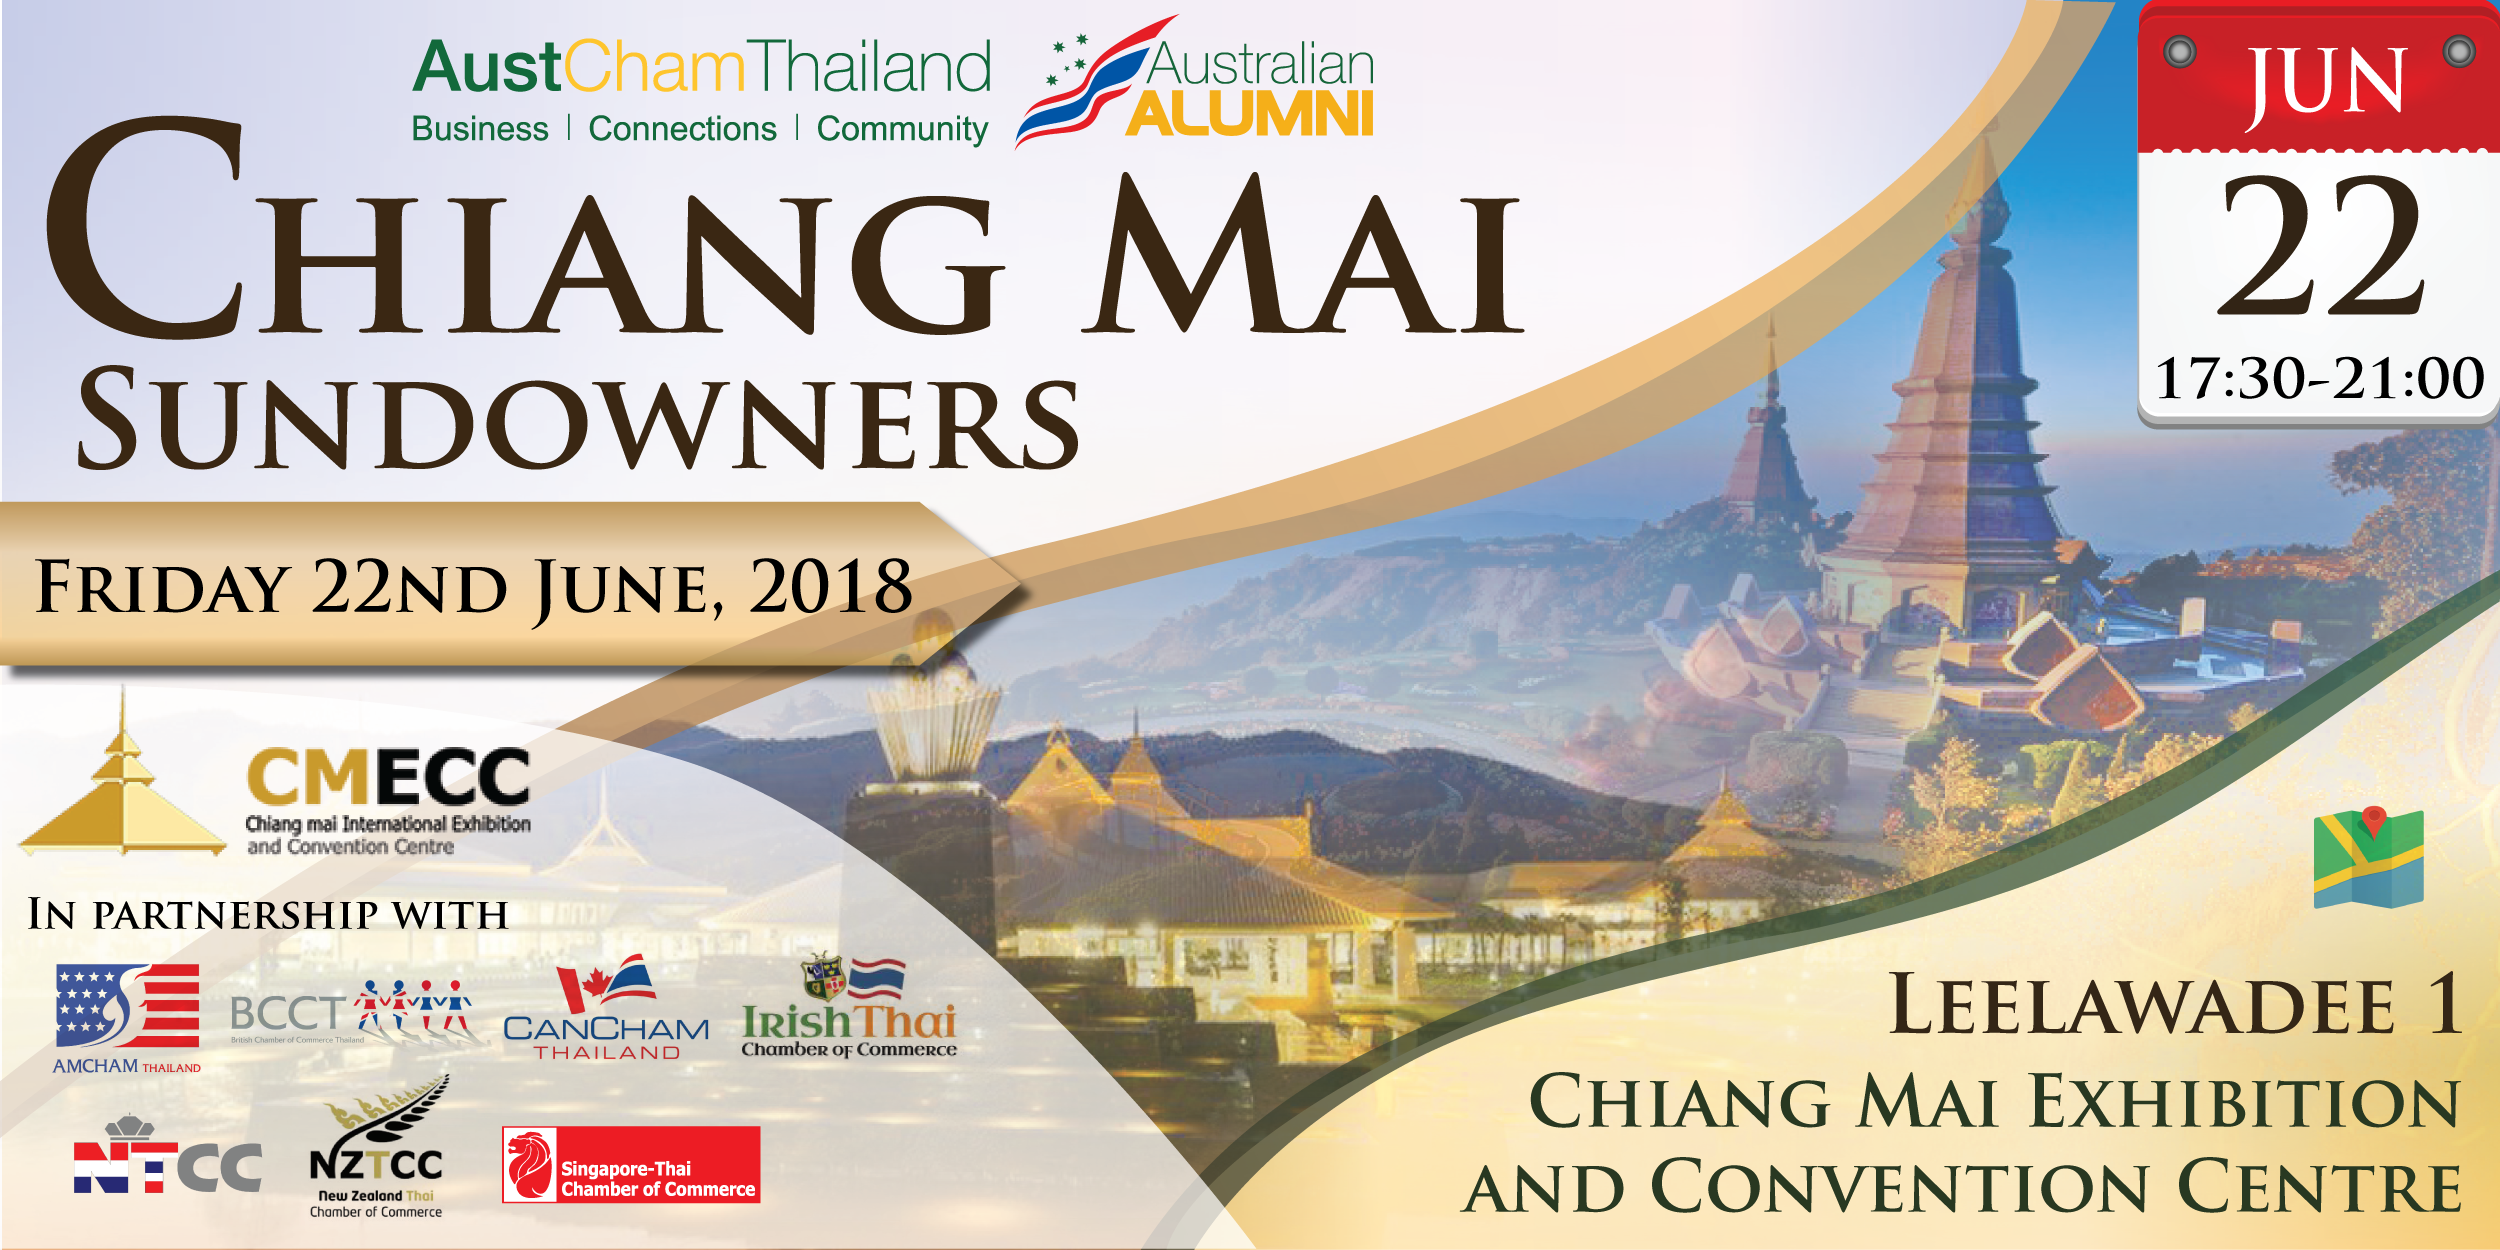 Chiang Mai Sundowners event banner.png